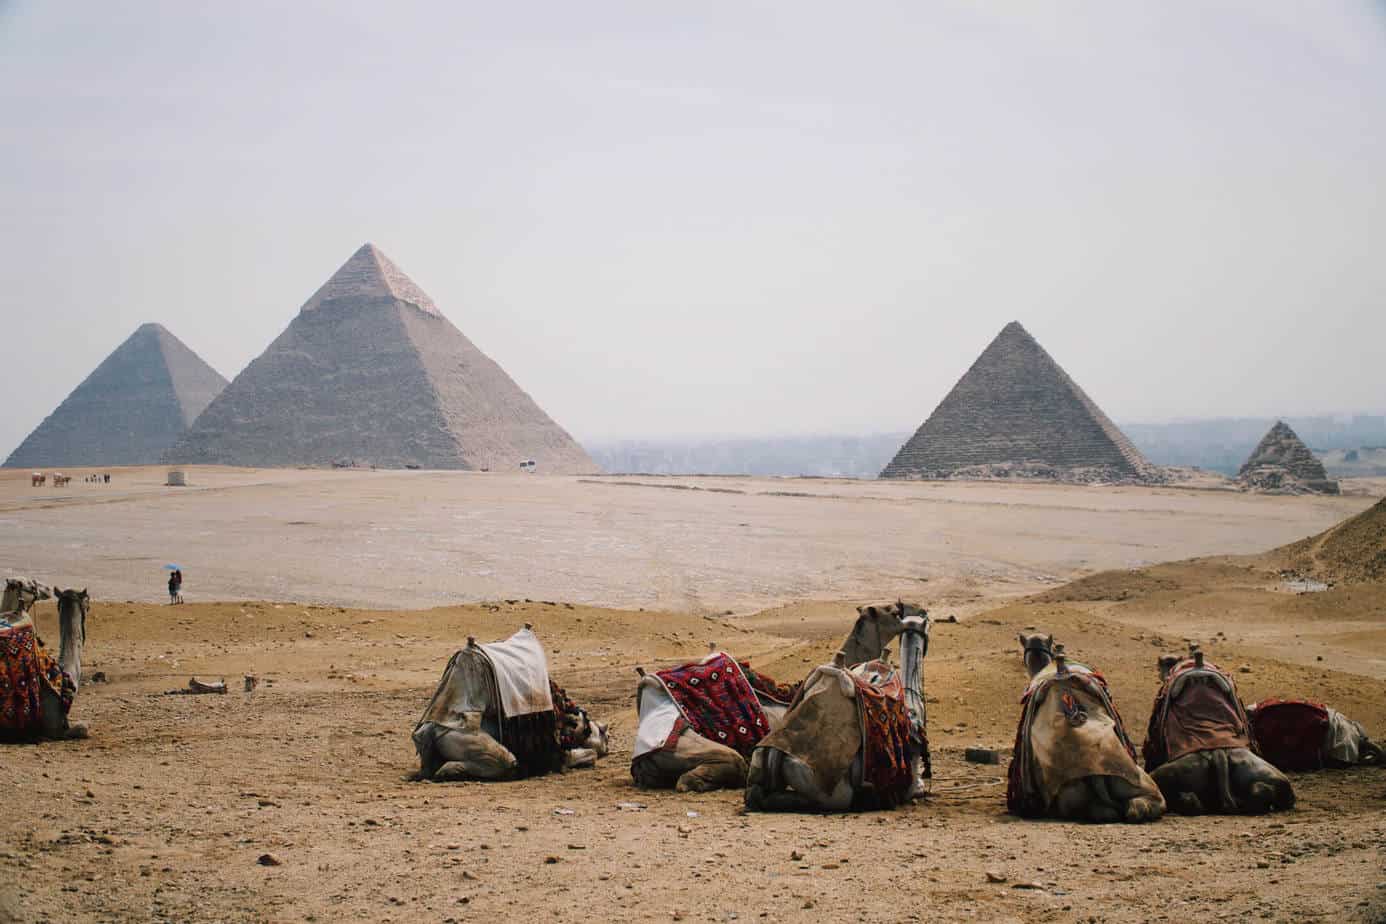 Camels sitting in front of the Great Pyramids of Giza, Egypt